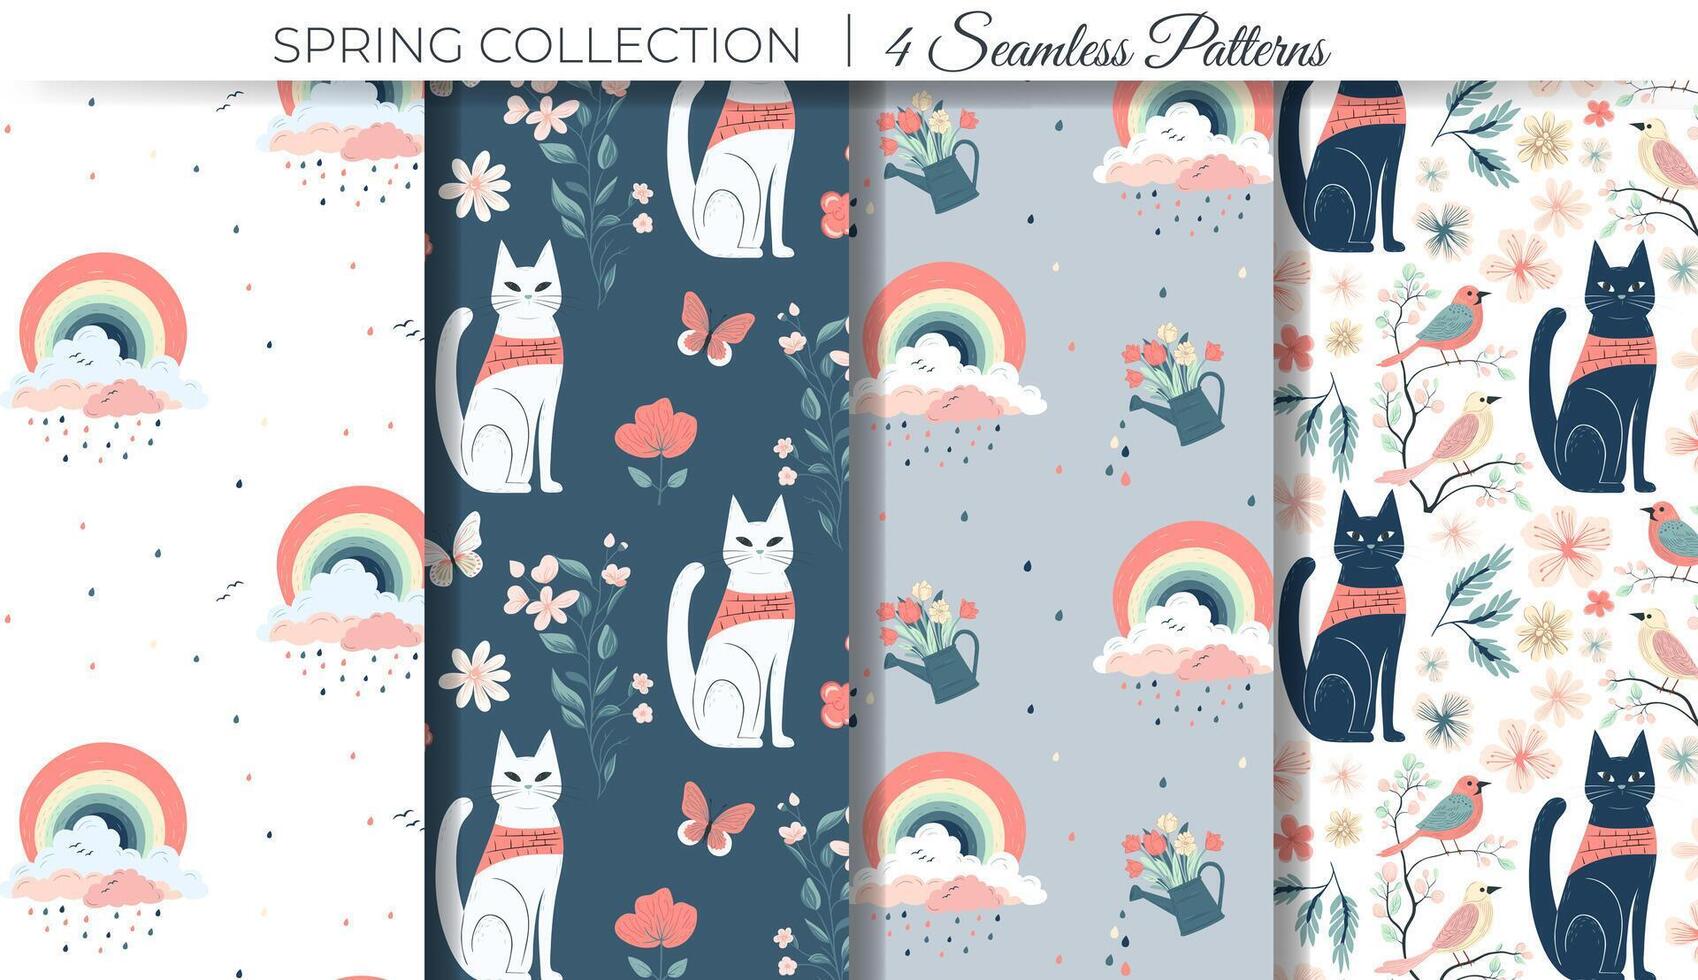 Set of spring backgrounds with rainbows and cats. Seamless pattern with fantasy elements. Childish texture vector